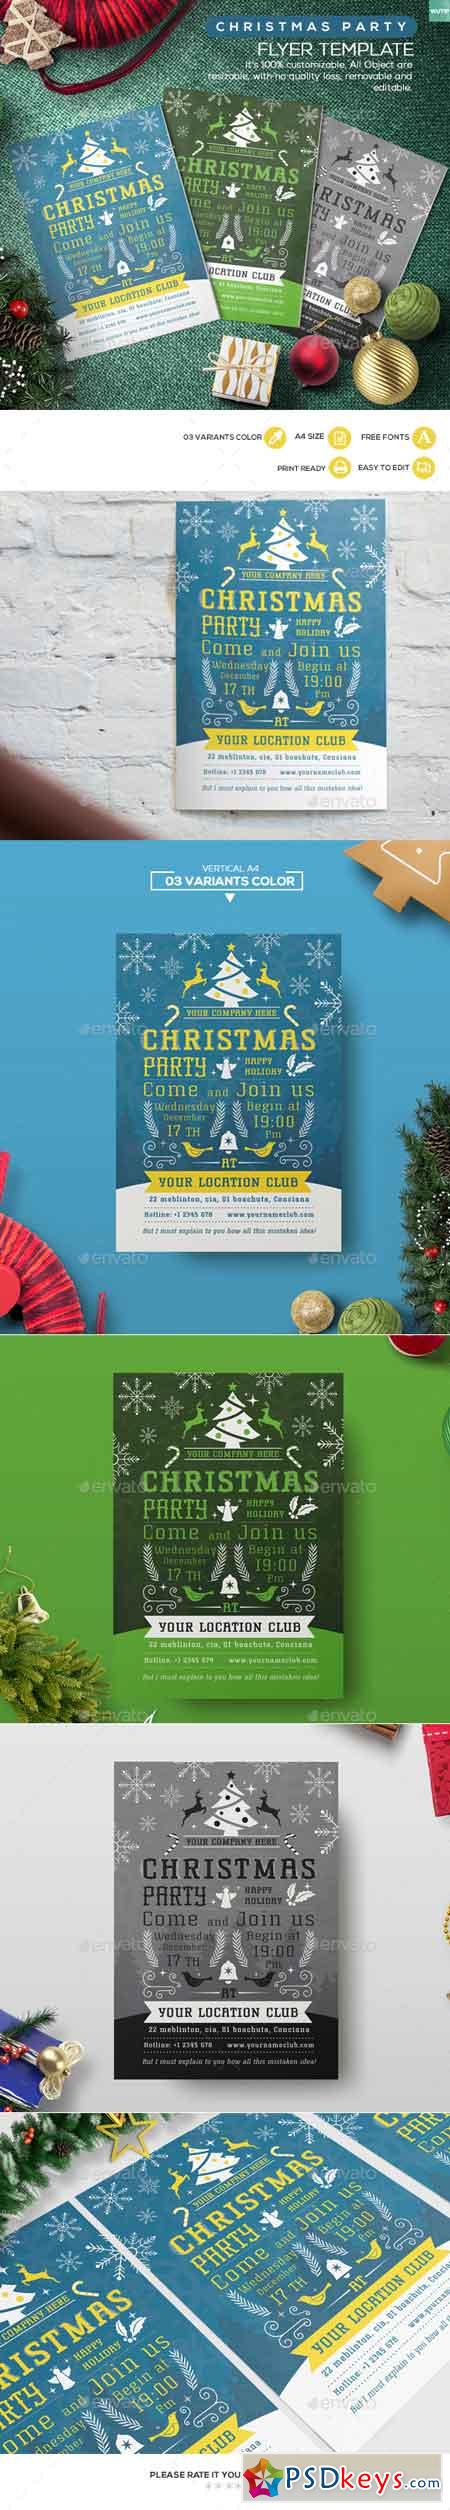 Christmas Party - Flyer Template 05 13728045